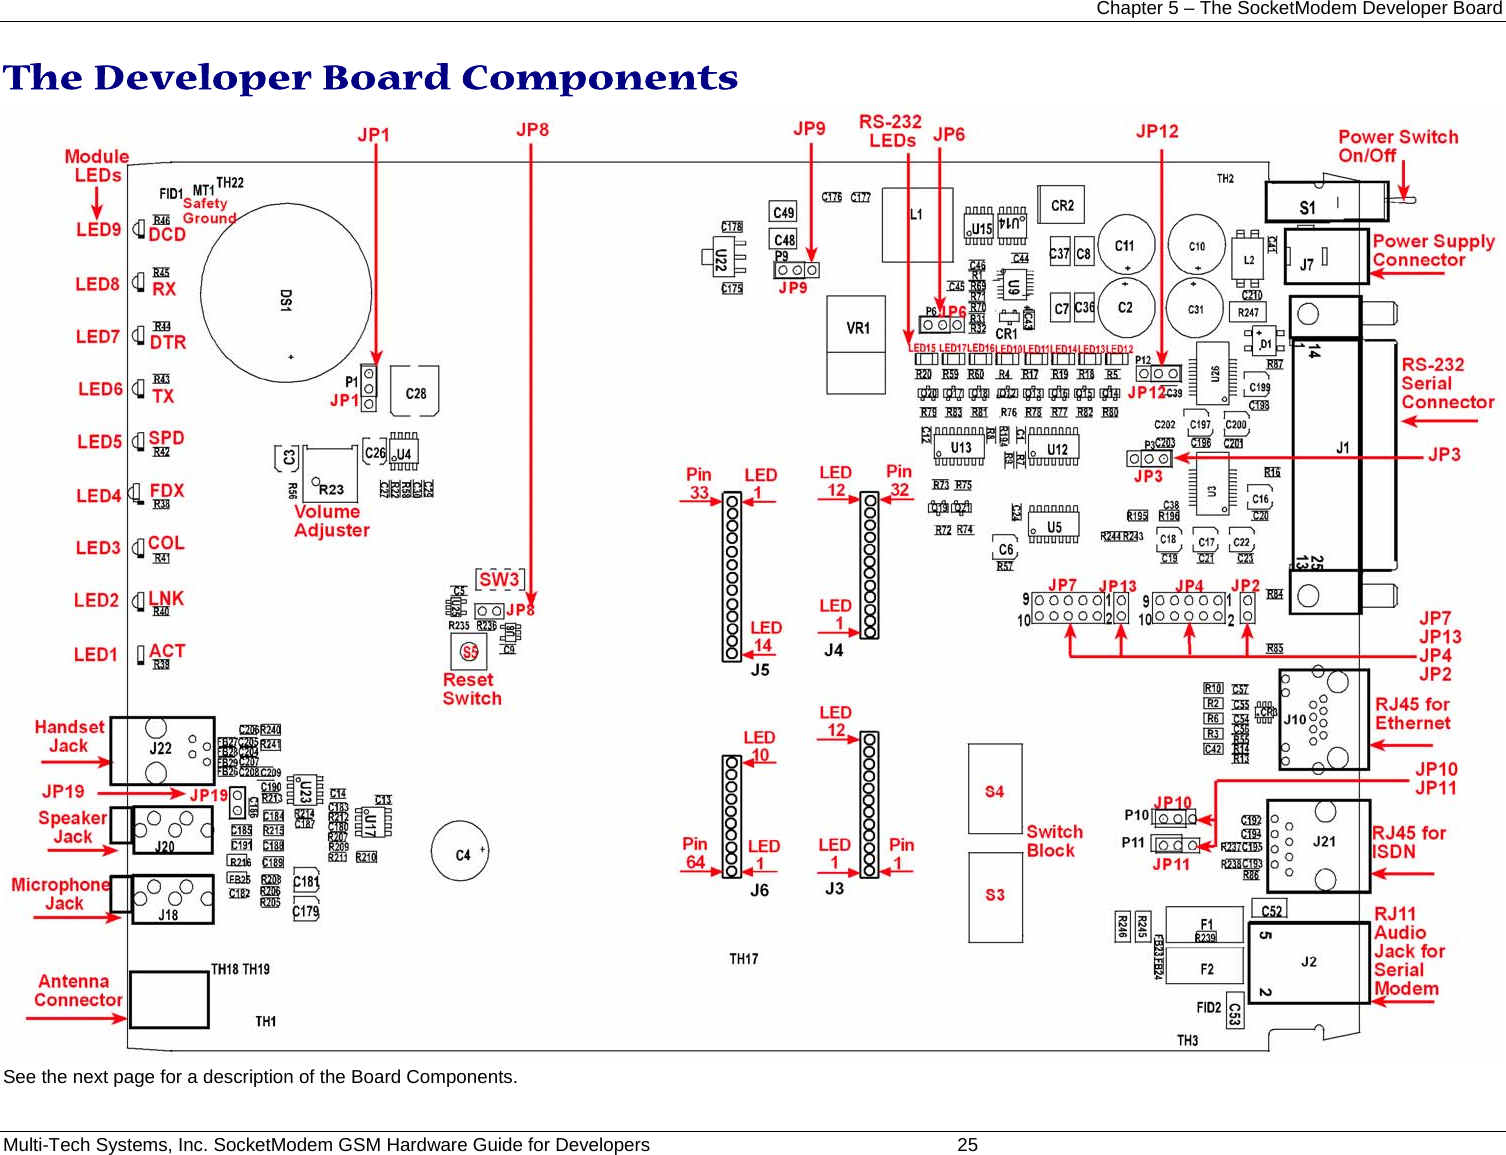 Chapter 5 – The SocketModem Developer Board Multi-Tech Systems, Inc. SocketModem GSM Hardware Guide for Developers   25 The Developer Board Components  See the next page for a description of the Board Components.  